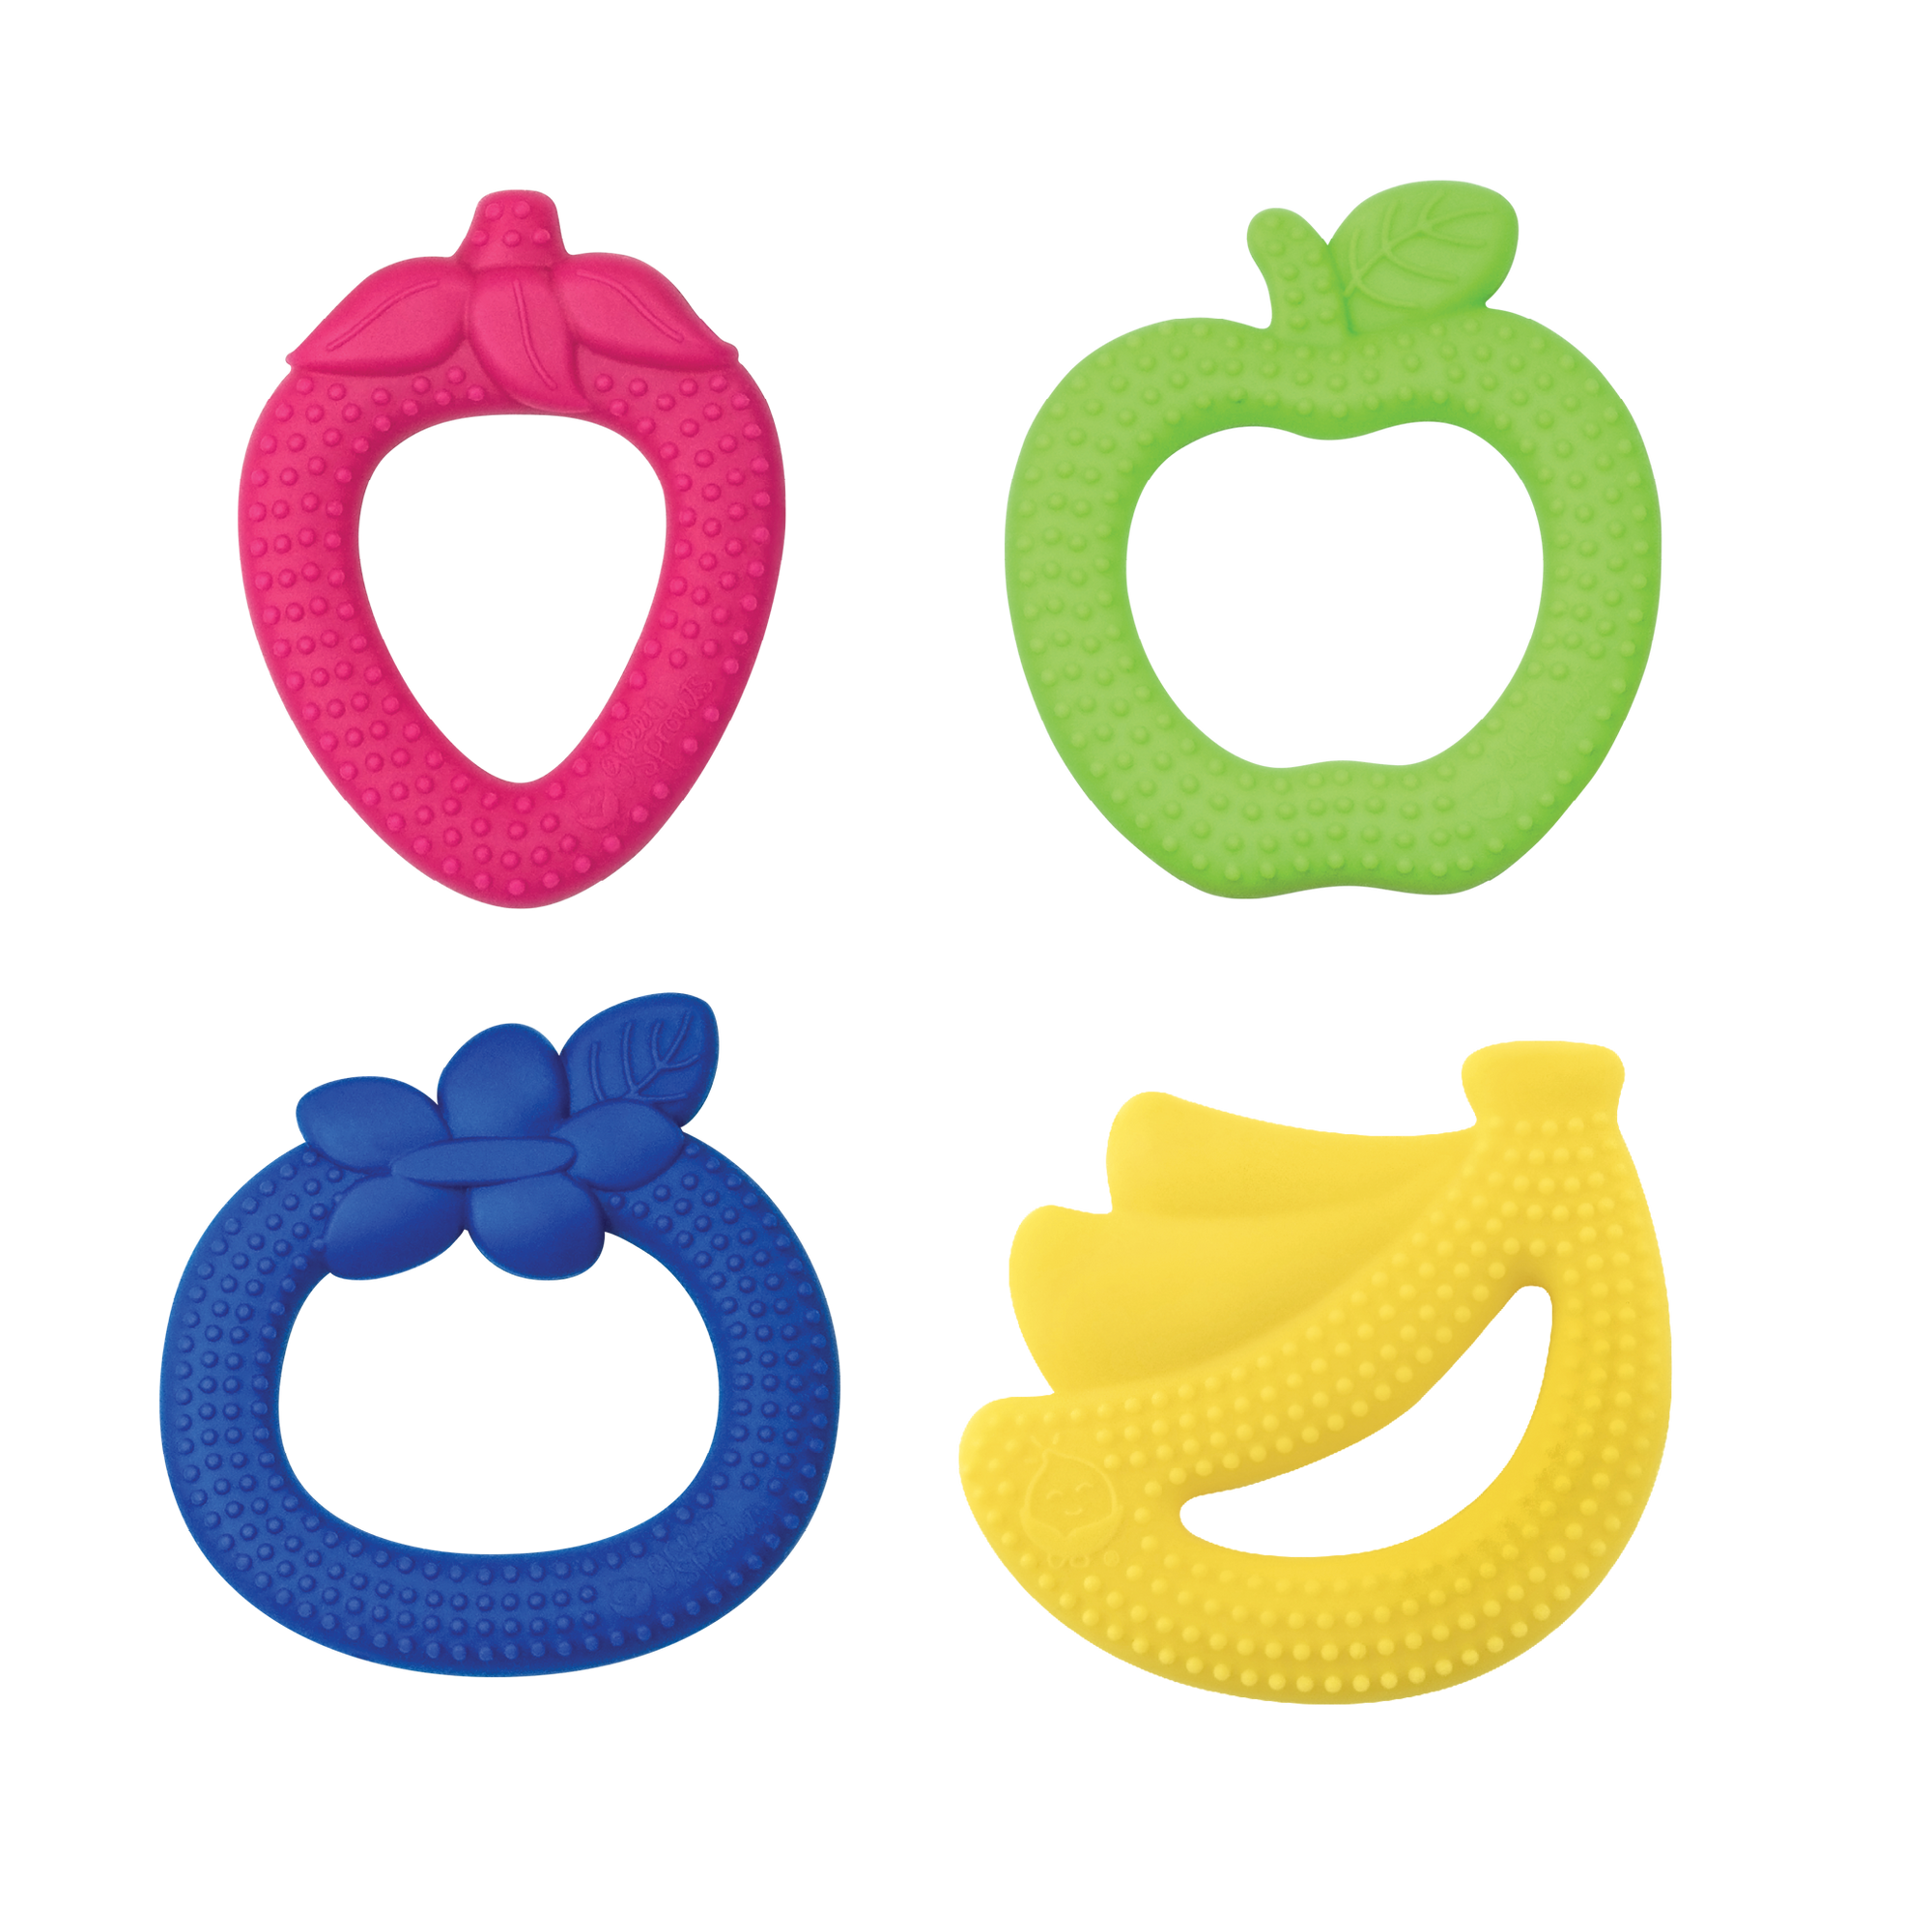 Fruit Teethers made from Silicone (4 pack)